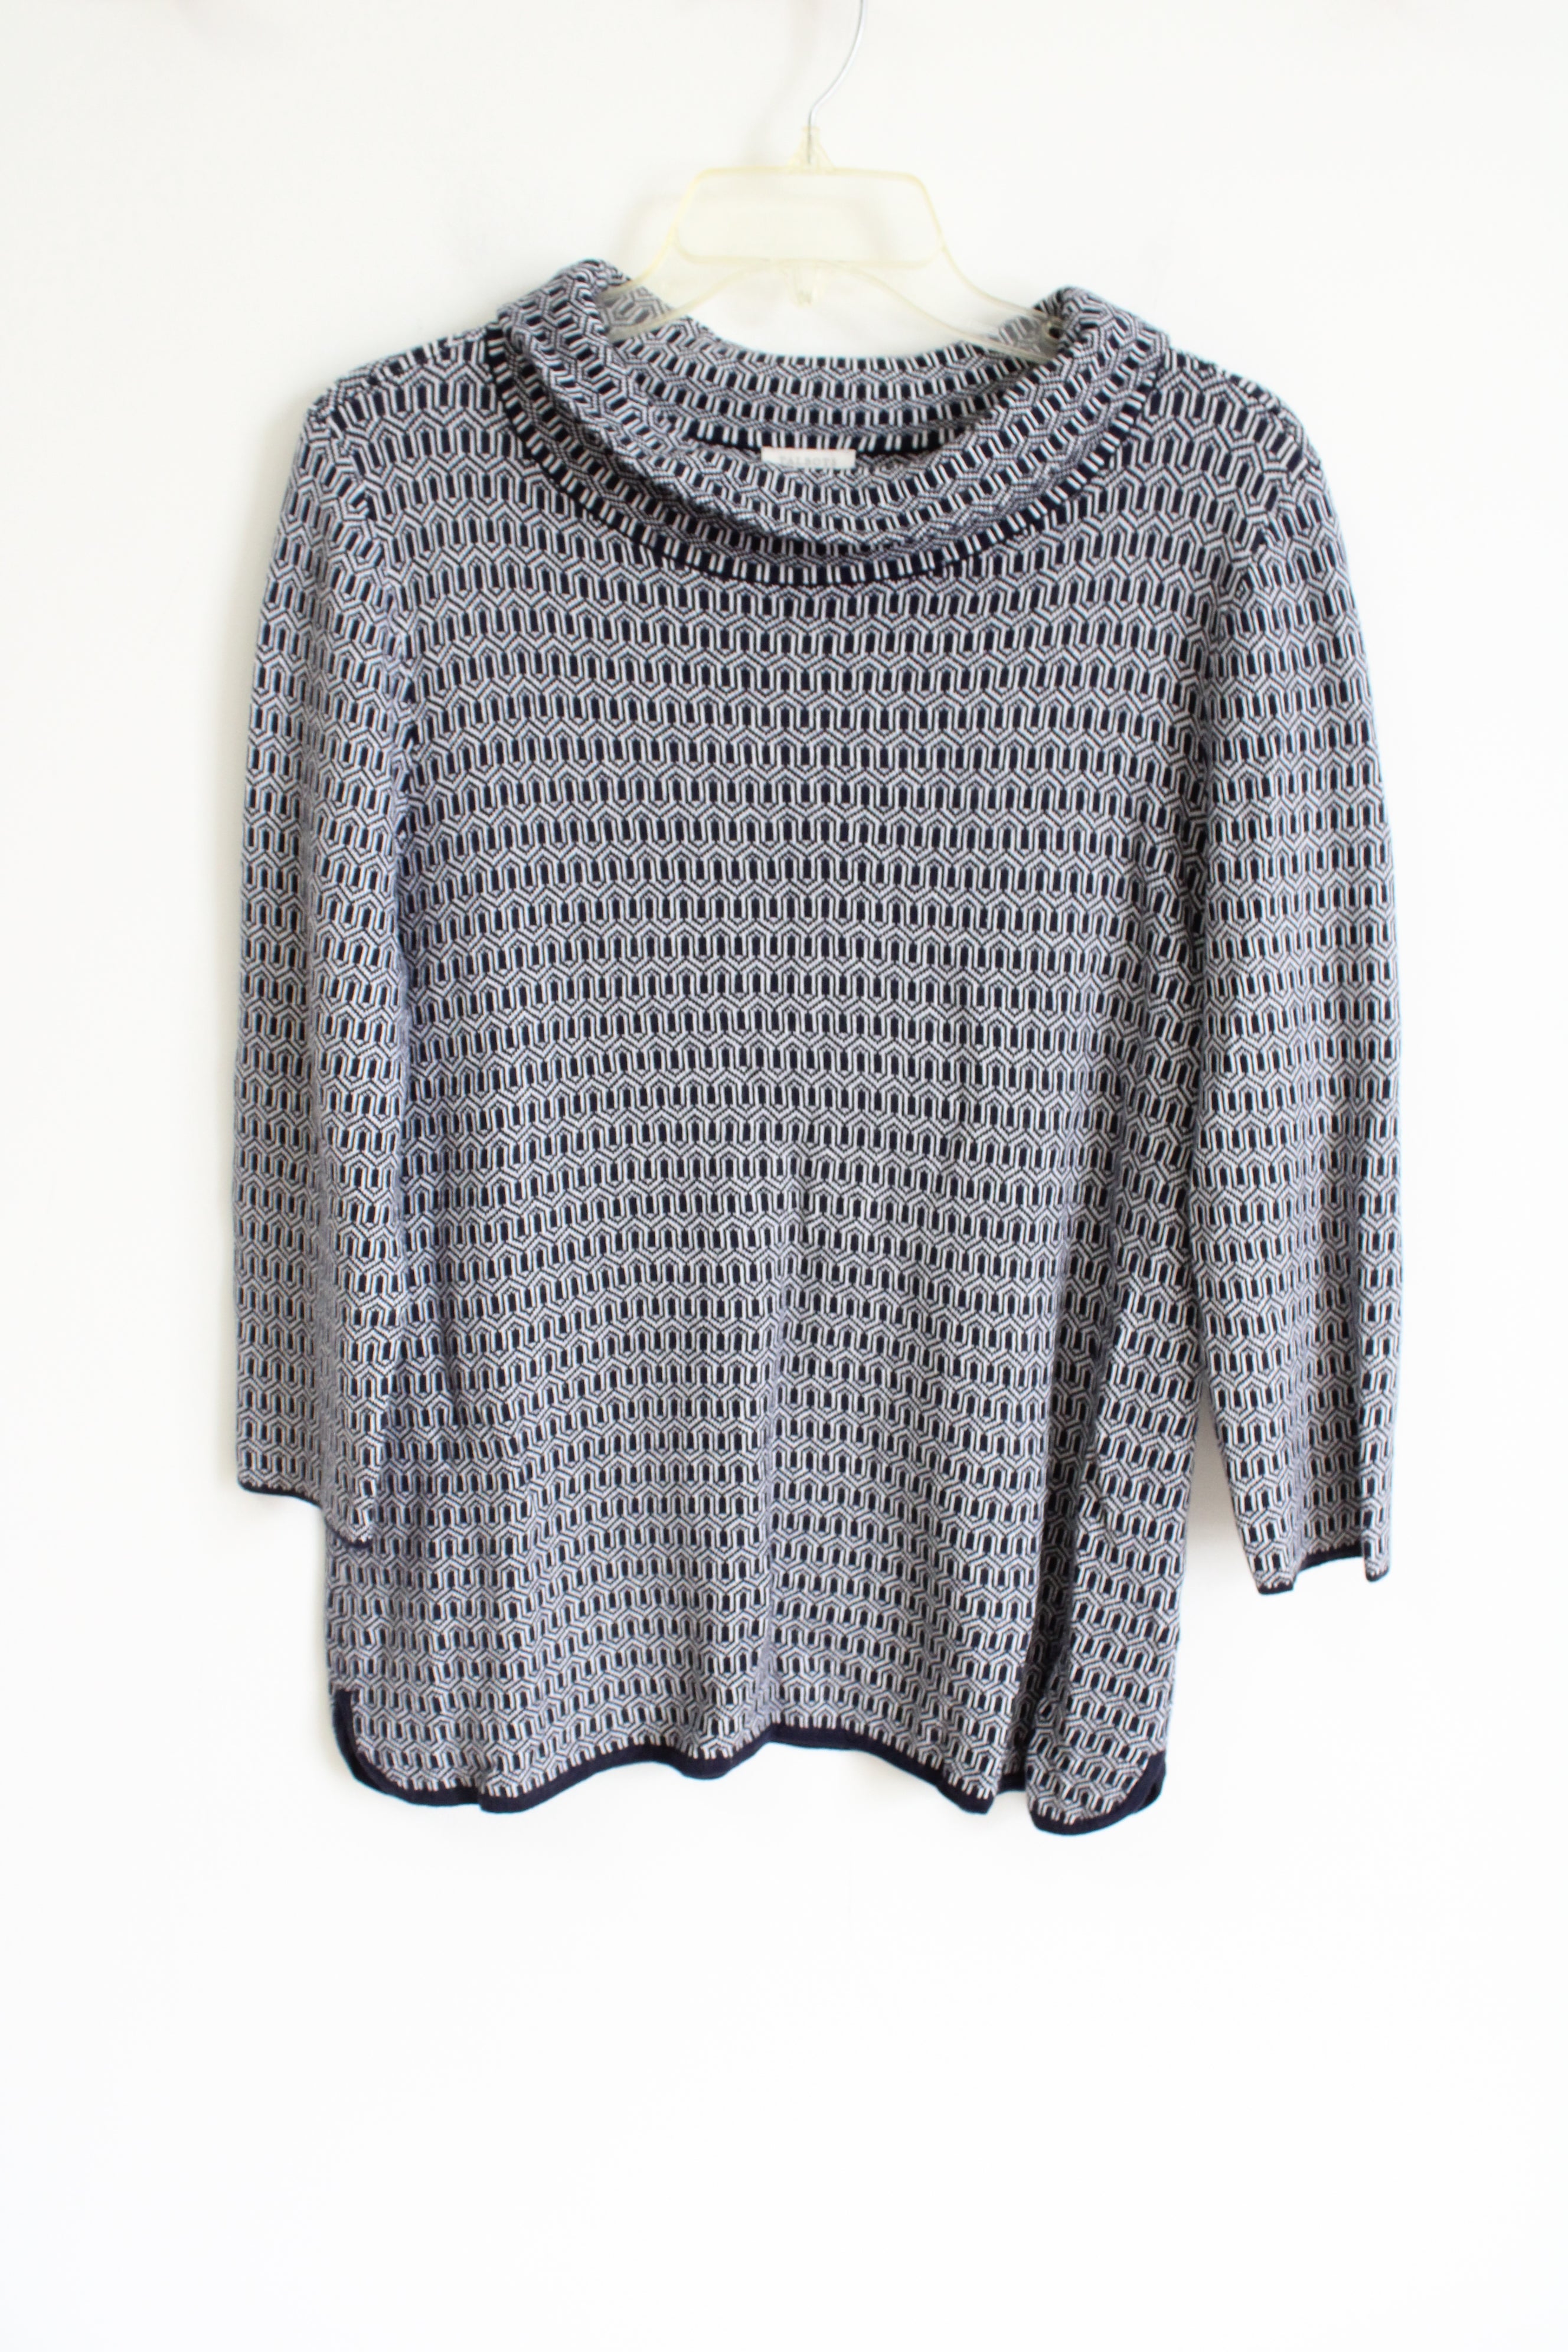 Talbots Navy Blue White Patterned Sweater | L Petite